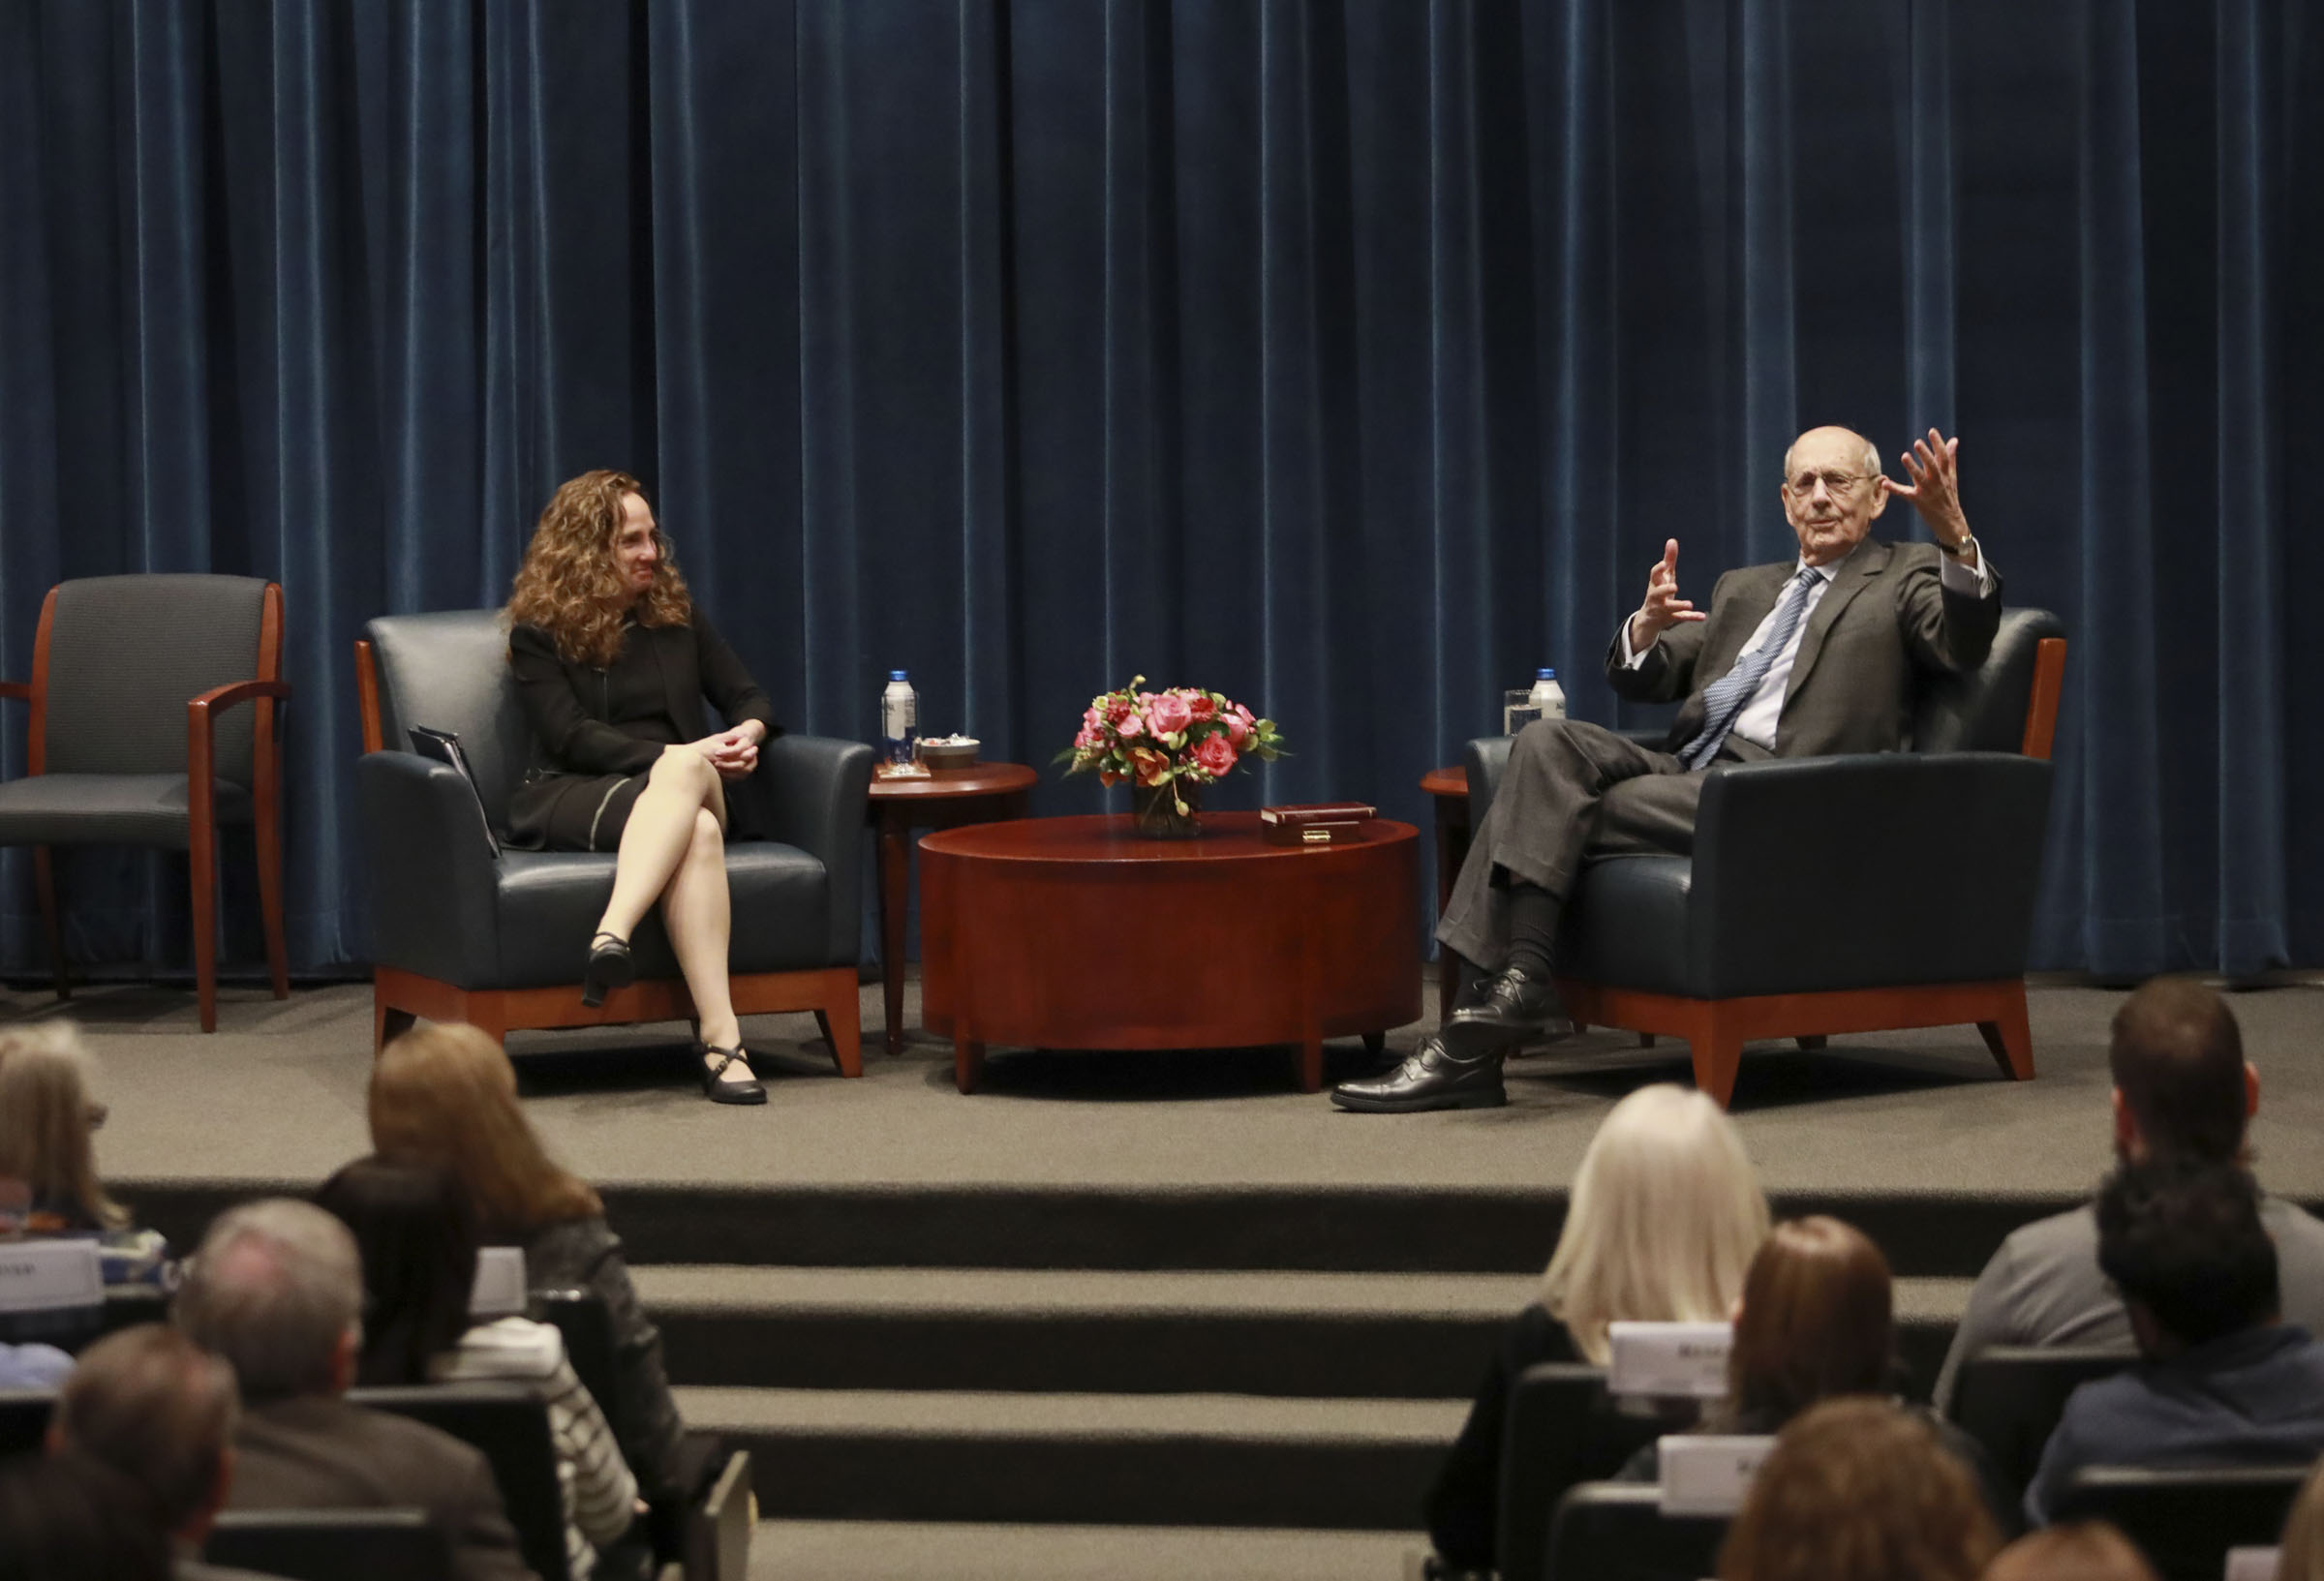 Breyer talks and gestures while seated in a leather chair on a stage. Goluboff listens from another chair.